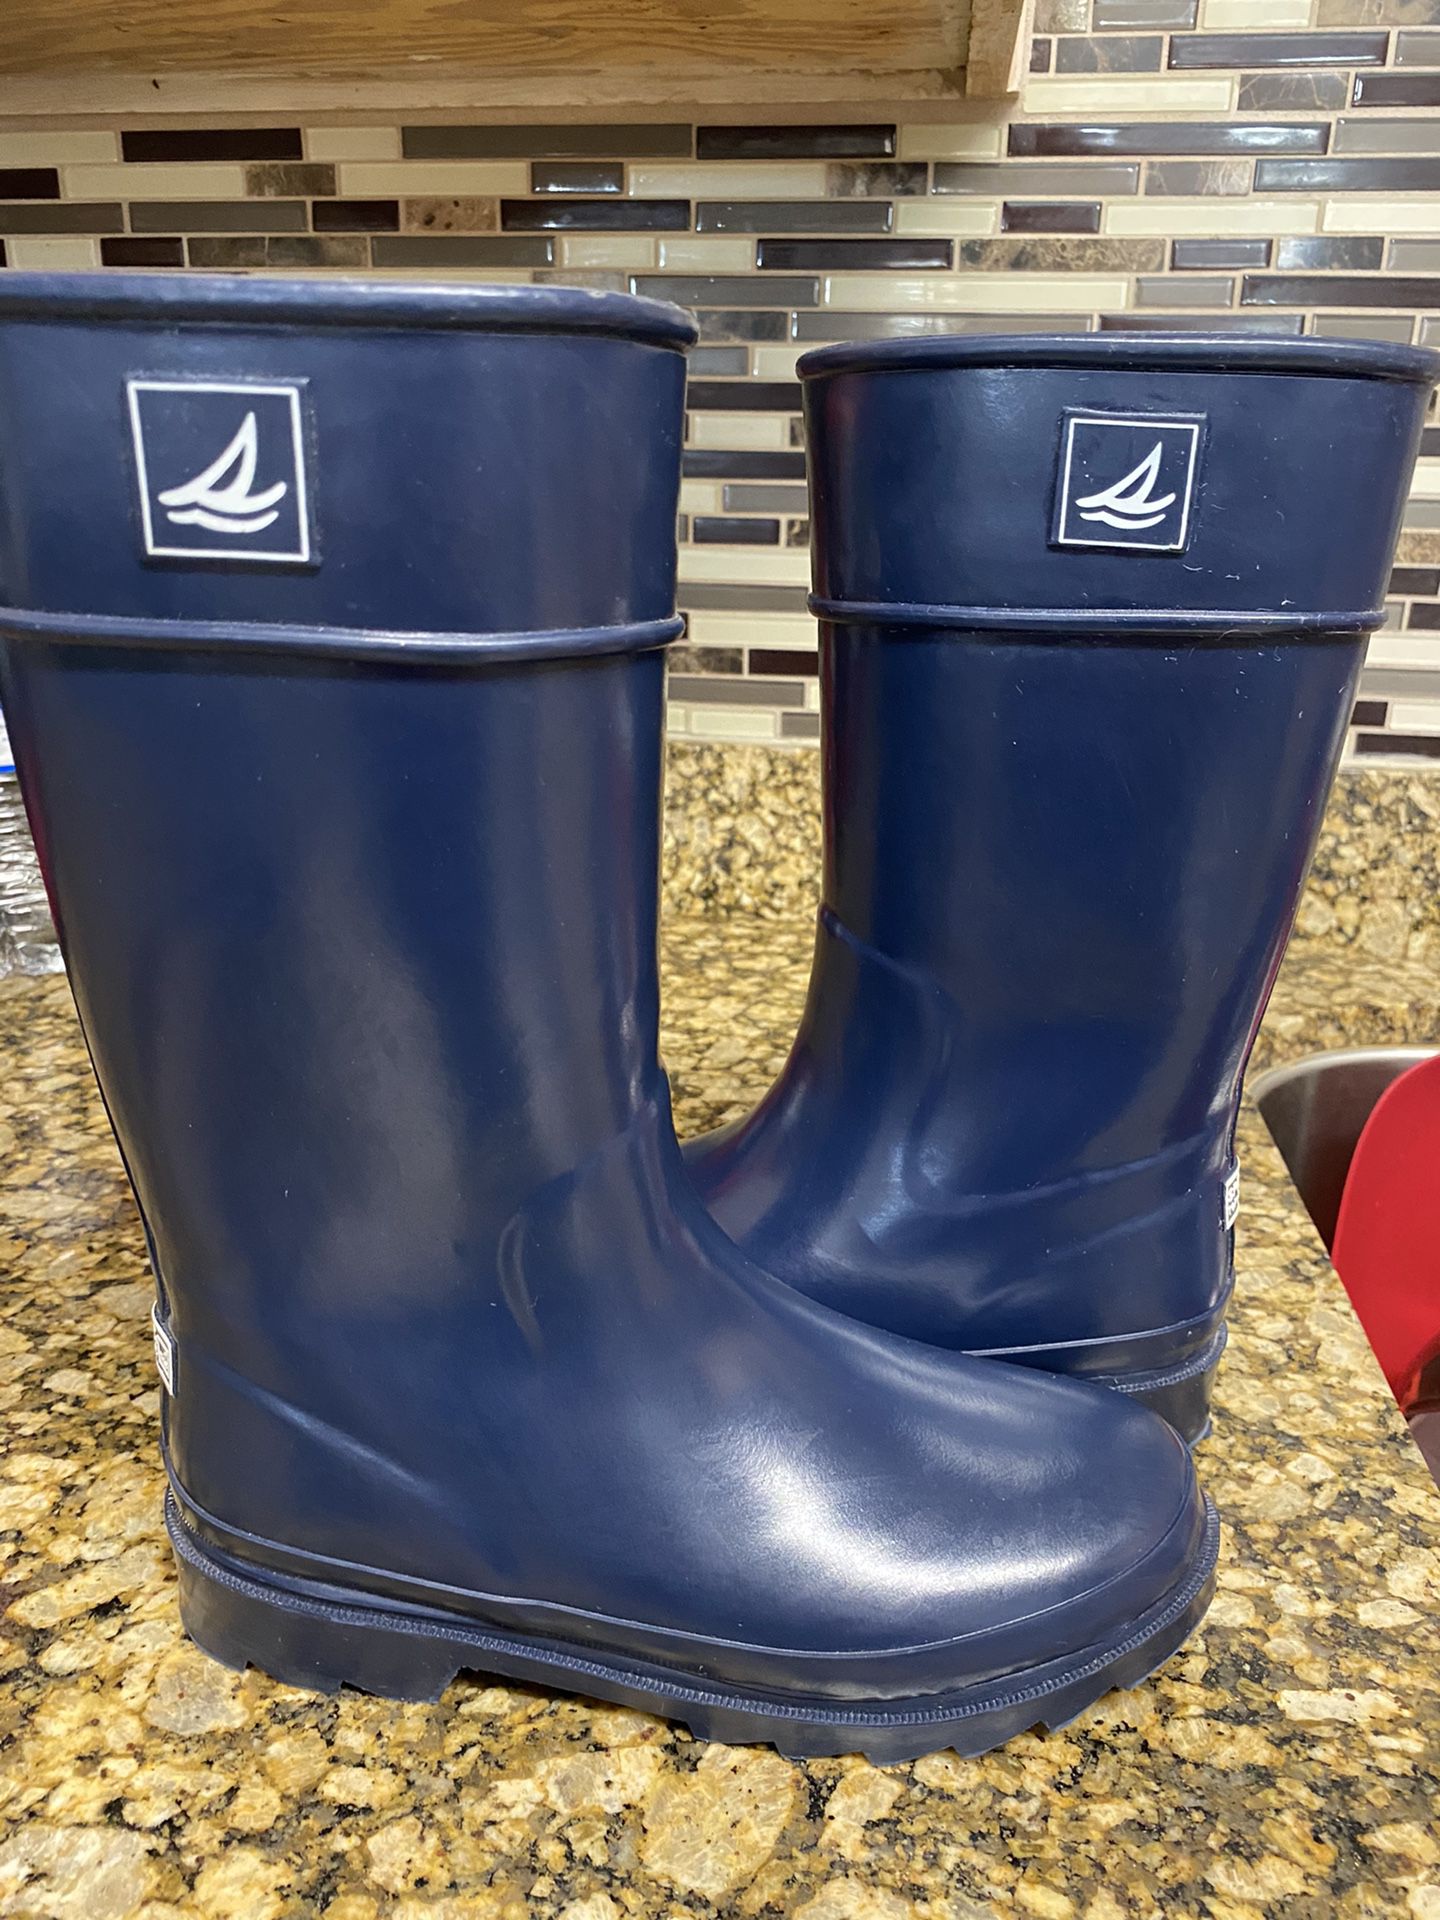 New Sperry’s Size 2 Rain Boots Navy Blue